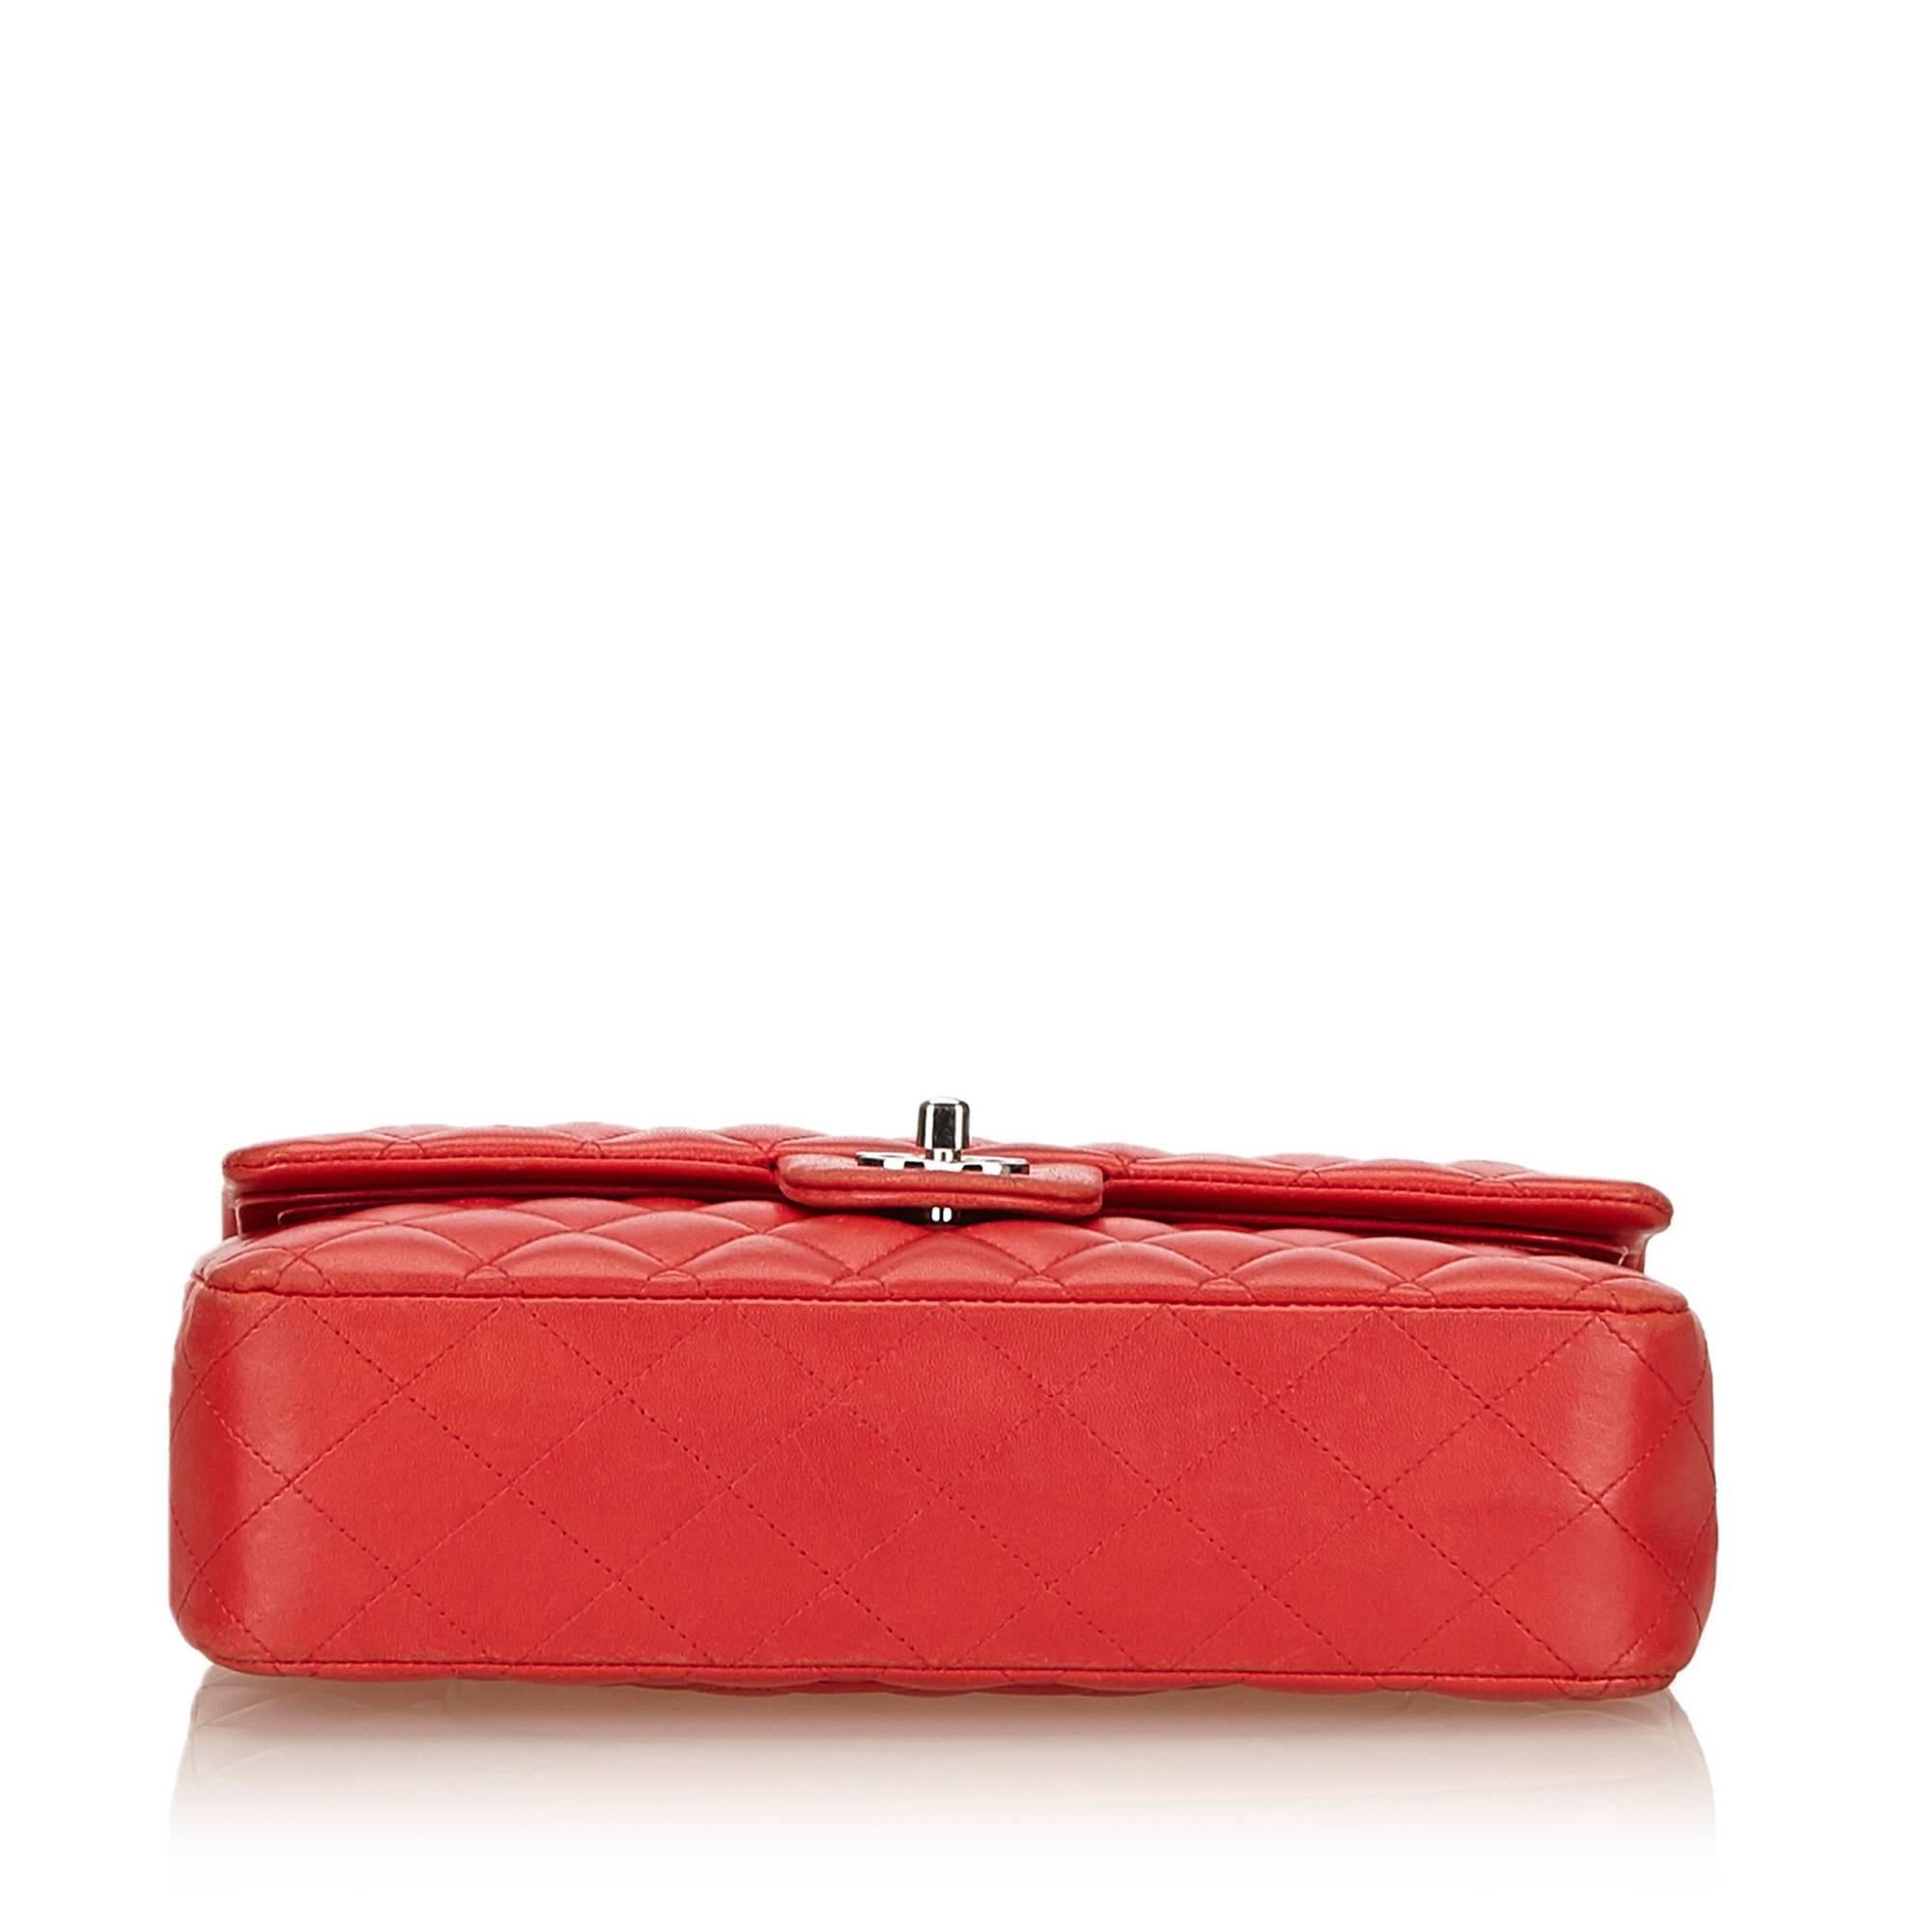 chanel flap bag red